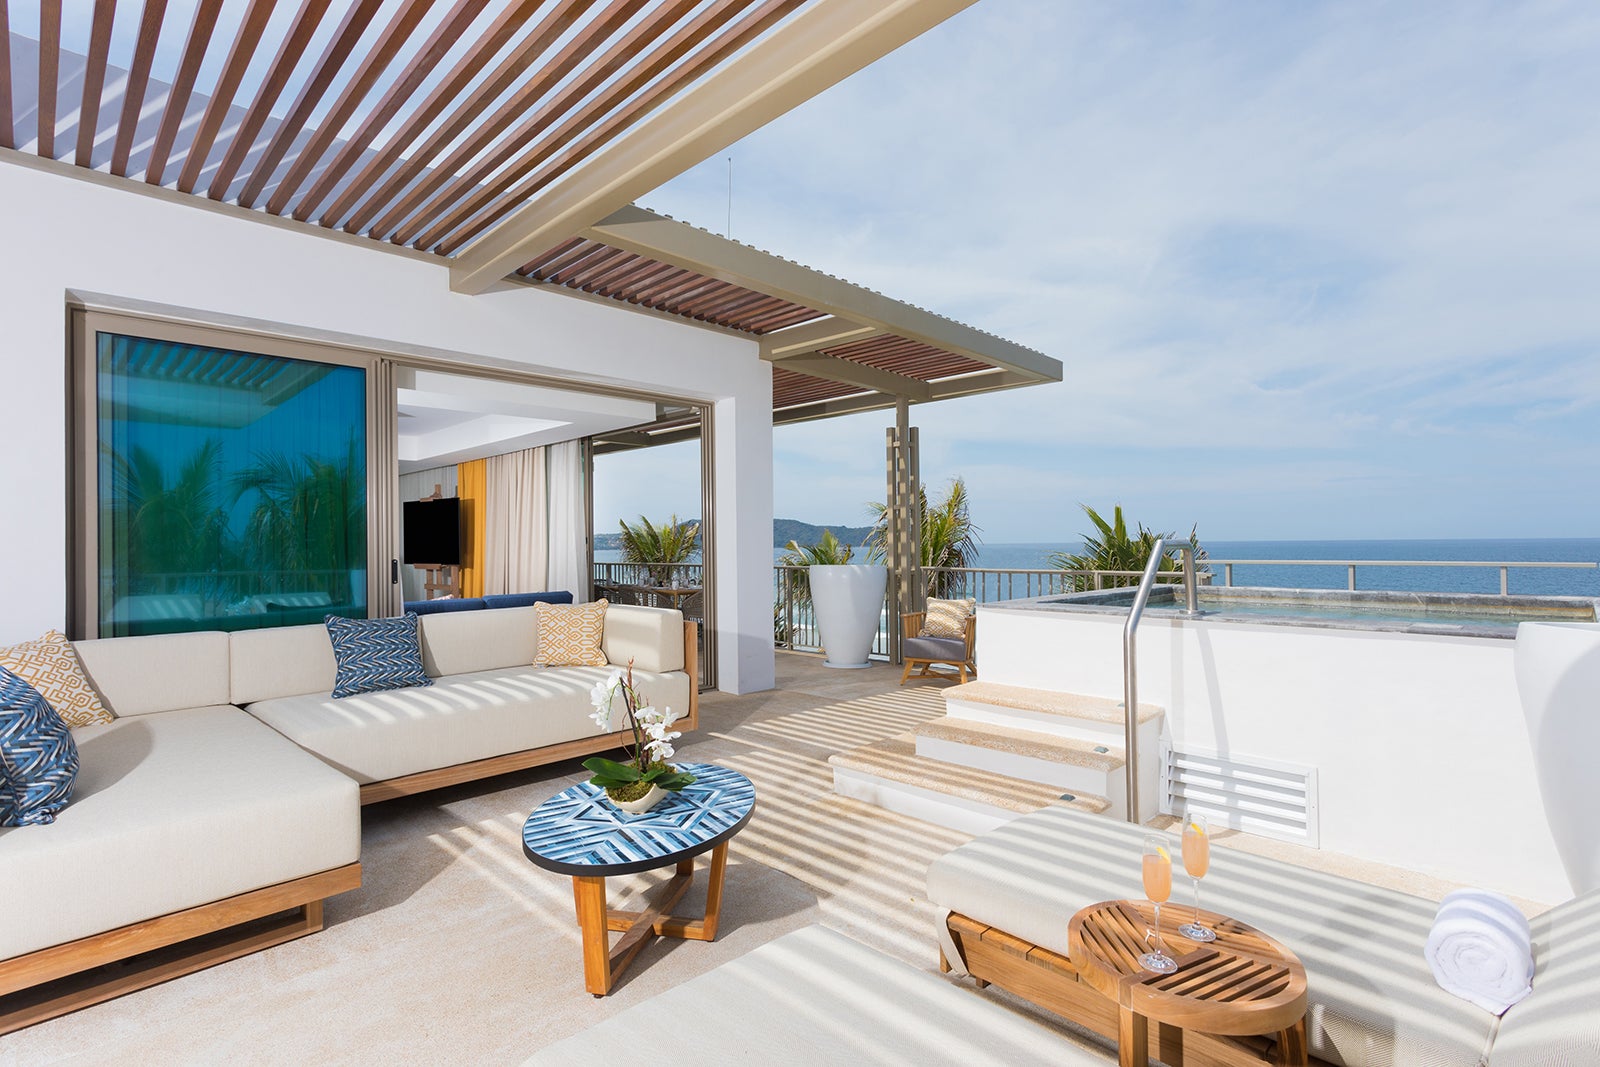 Hotel suite patio with a plunge pool overlooking the ocean